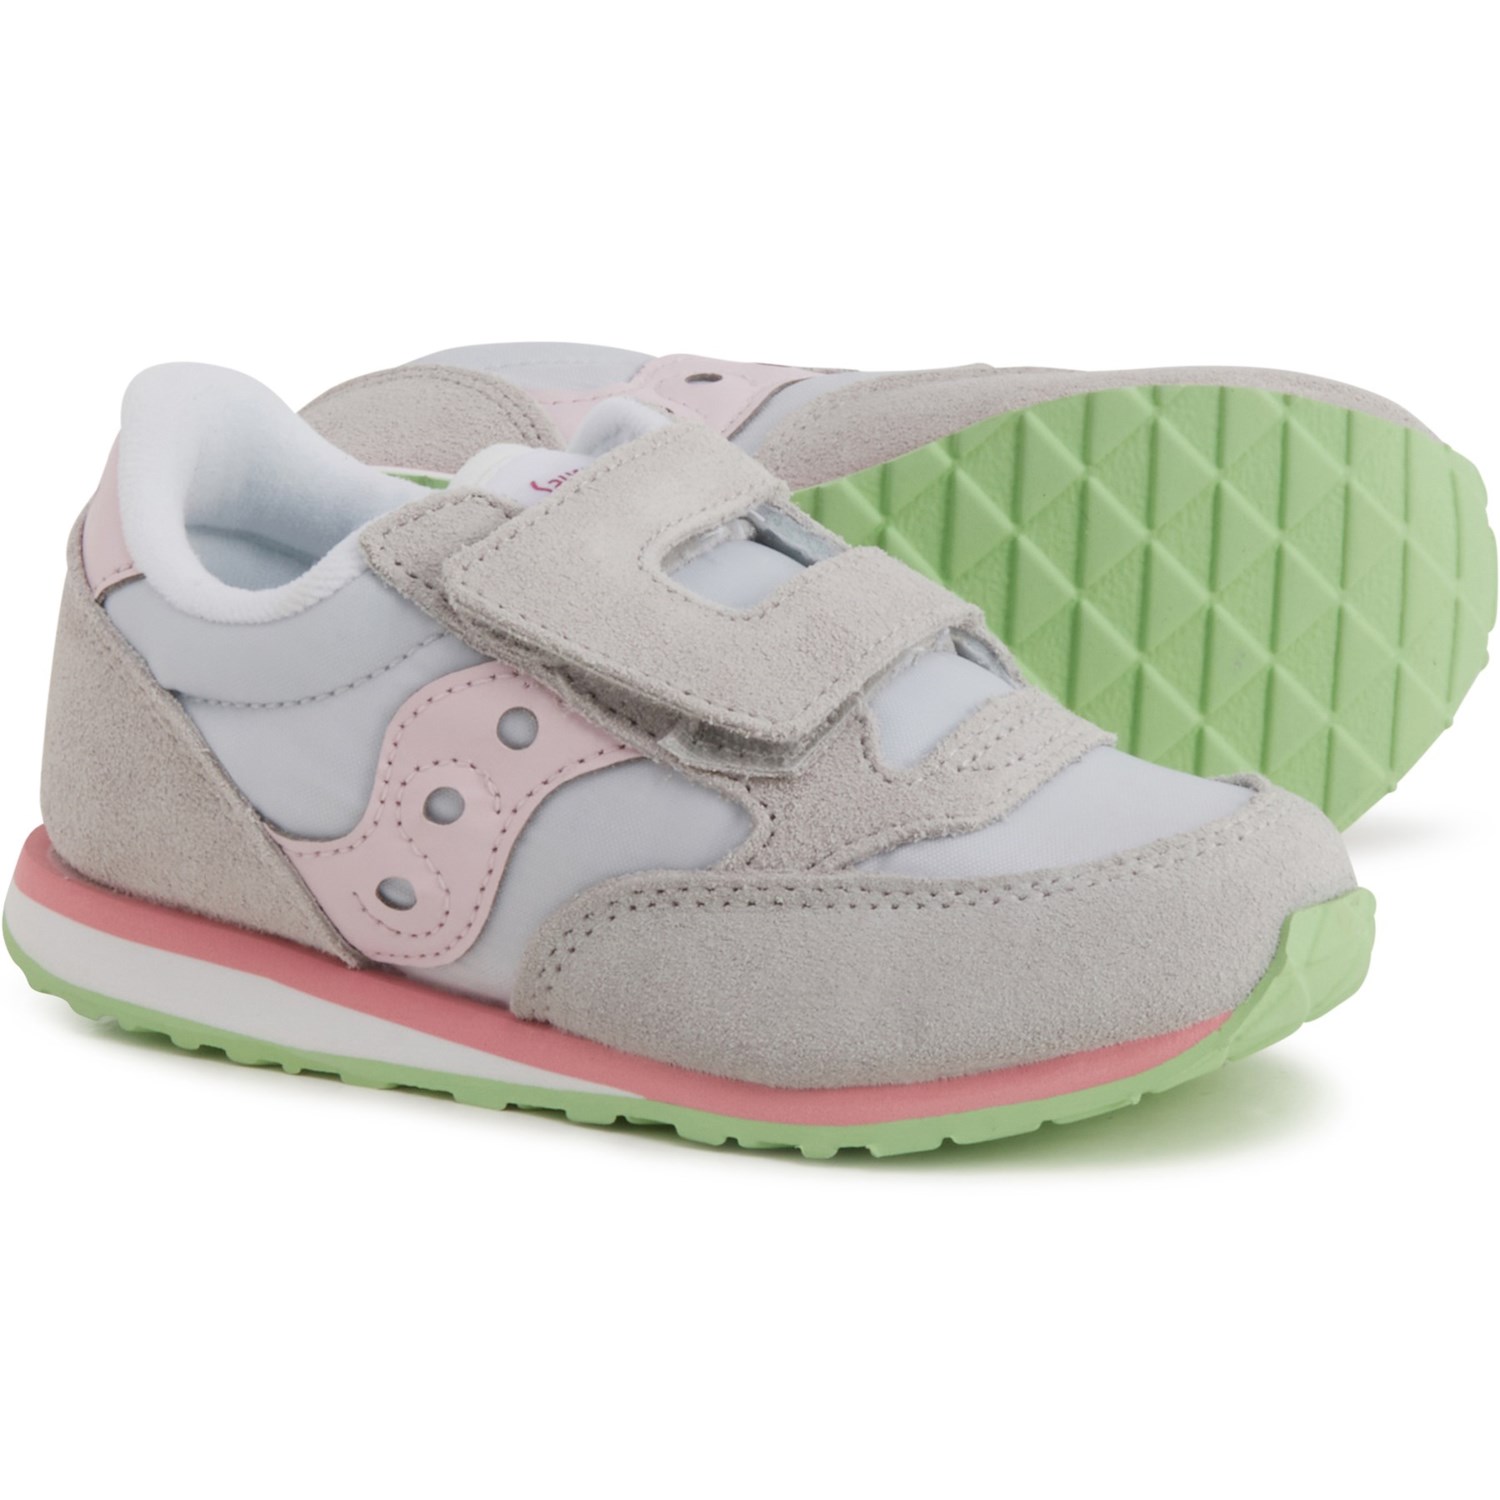 Saucony Toddler Girls Fashion Sneakers